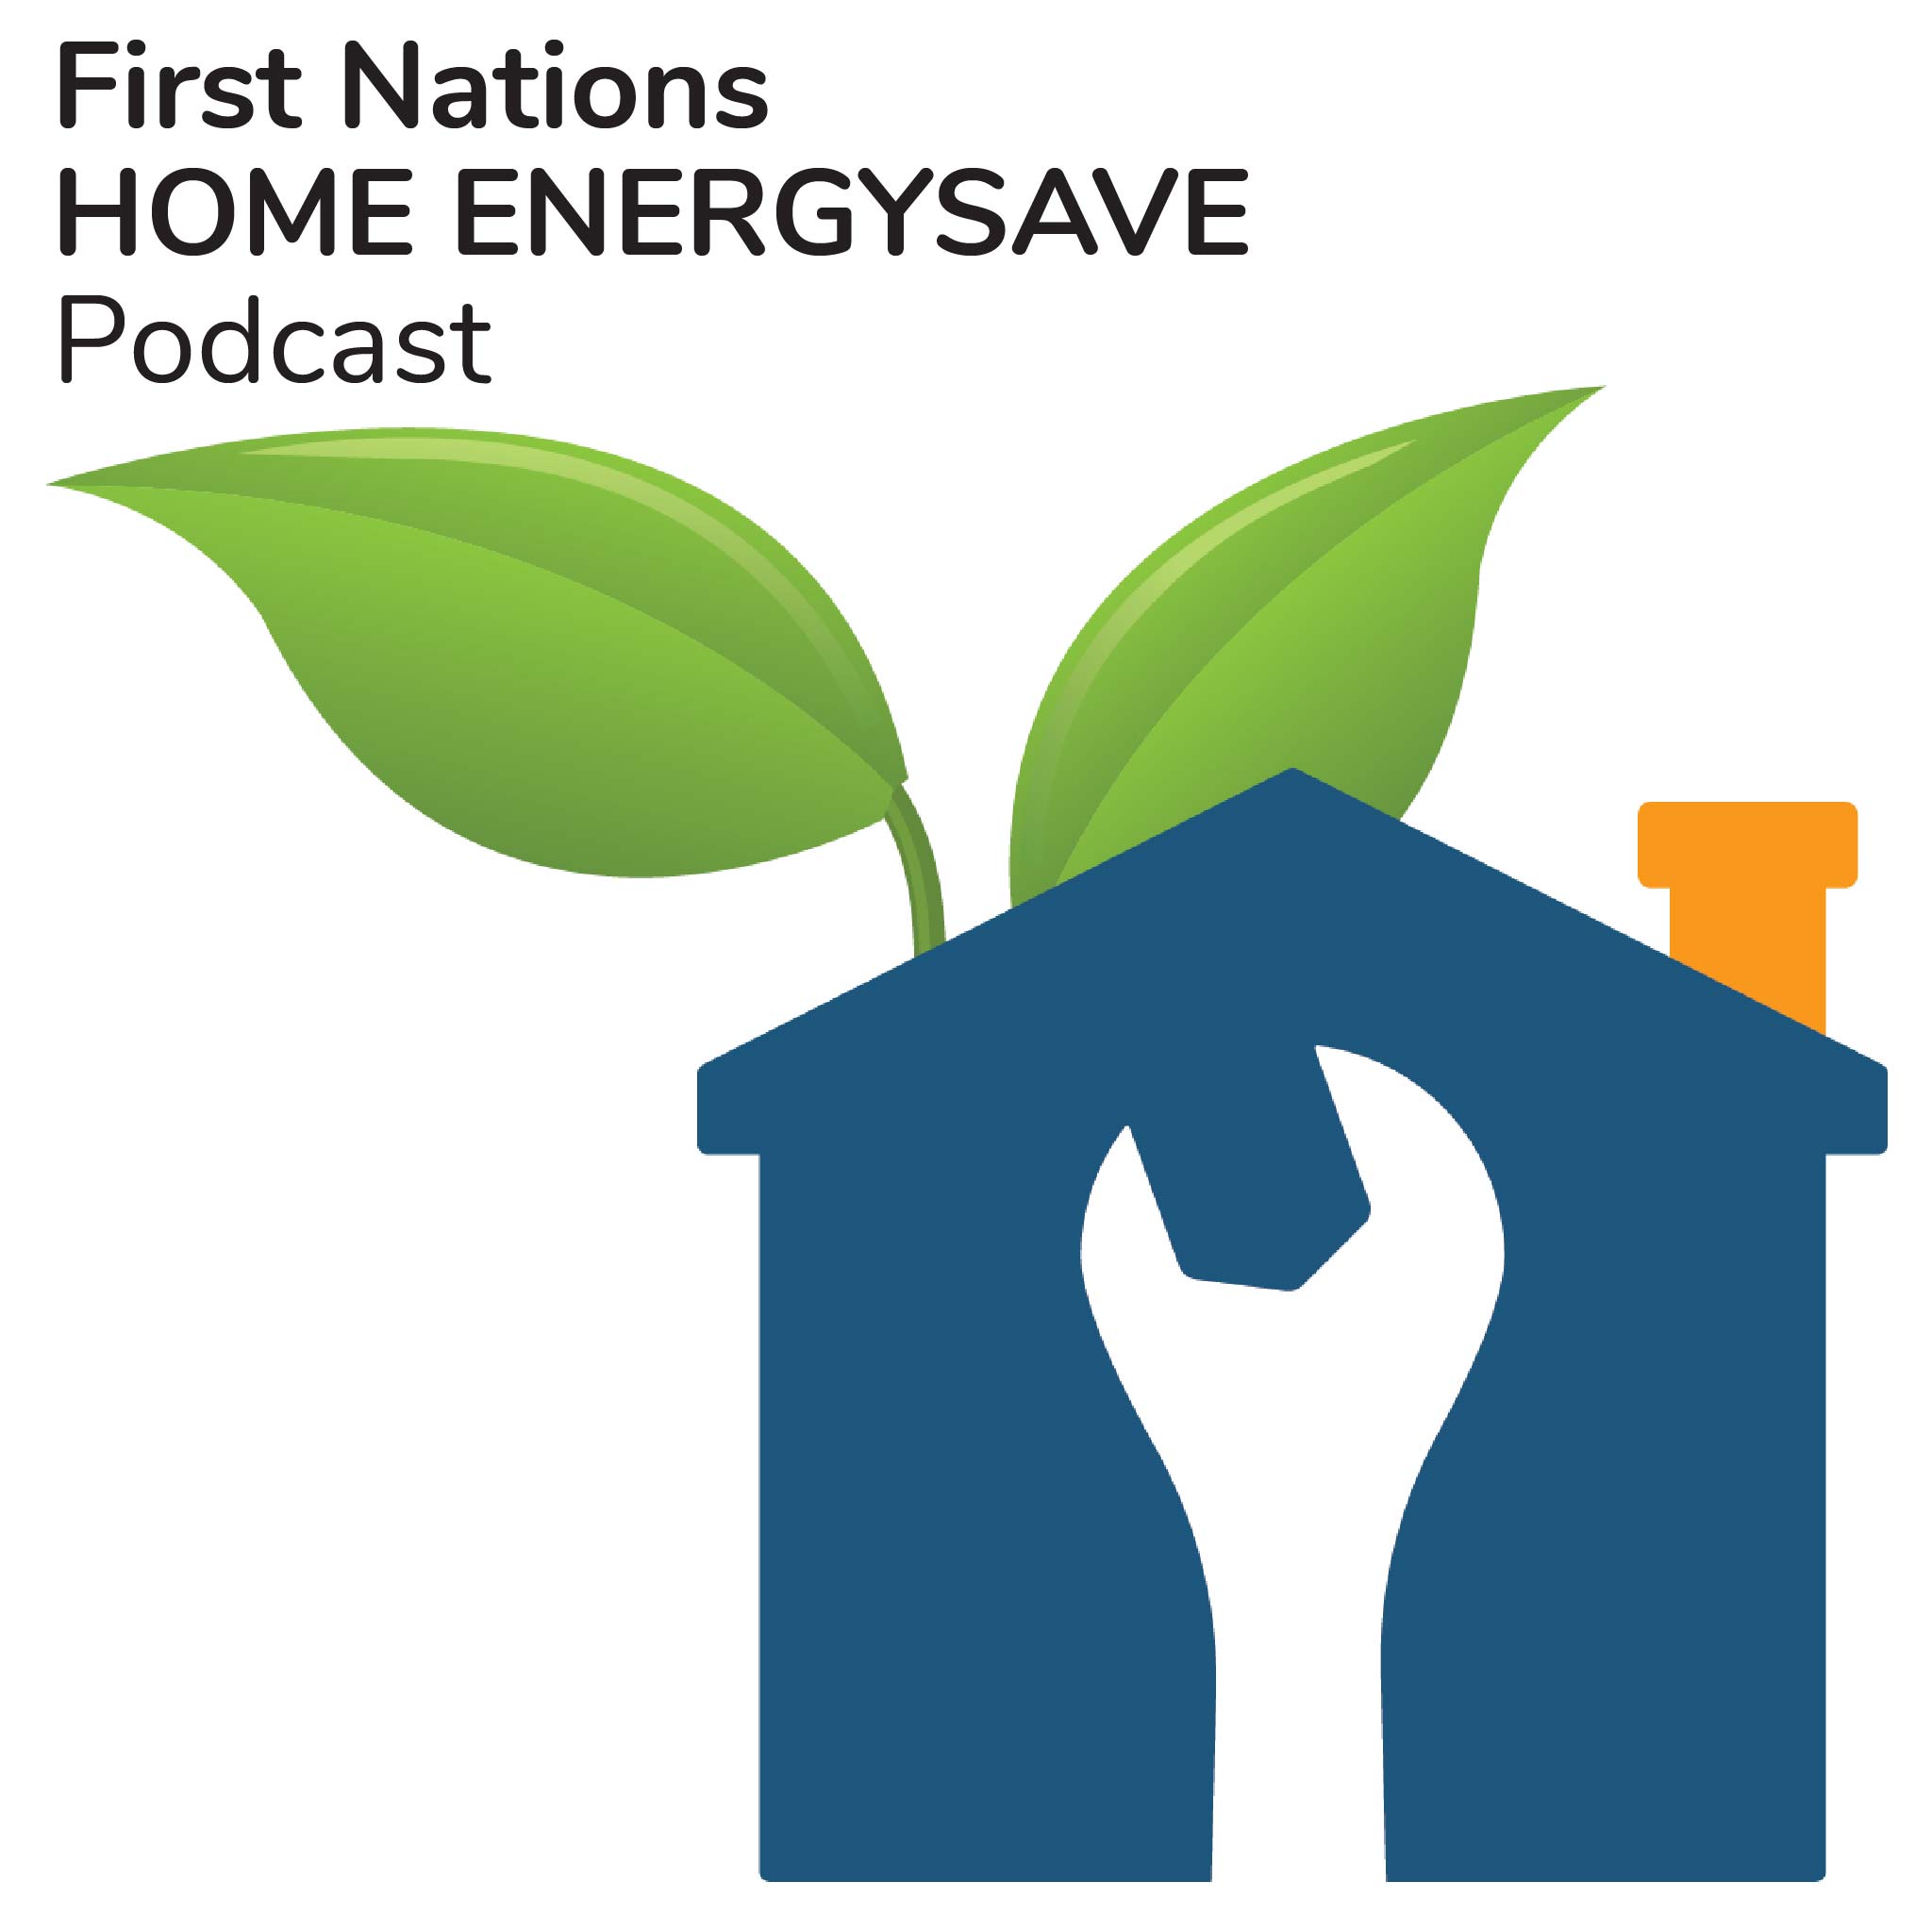 The First Nations Home EnergySave Podcast